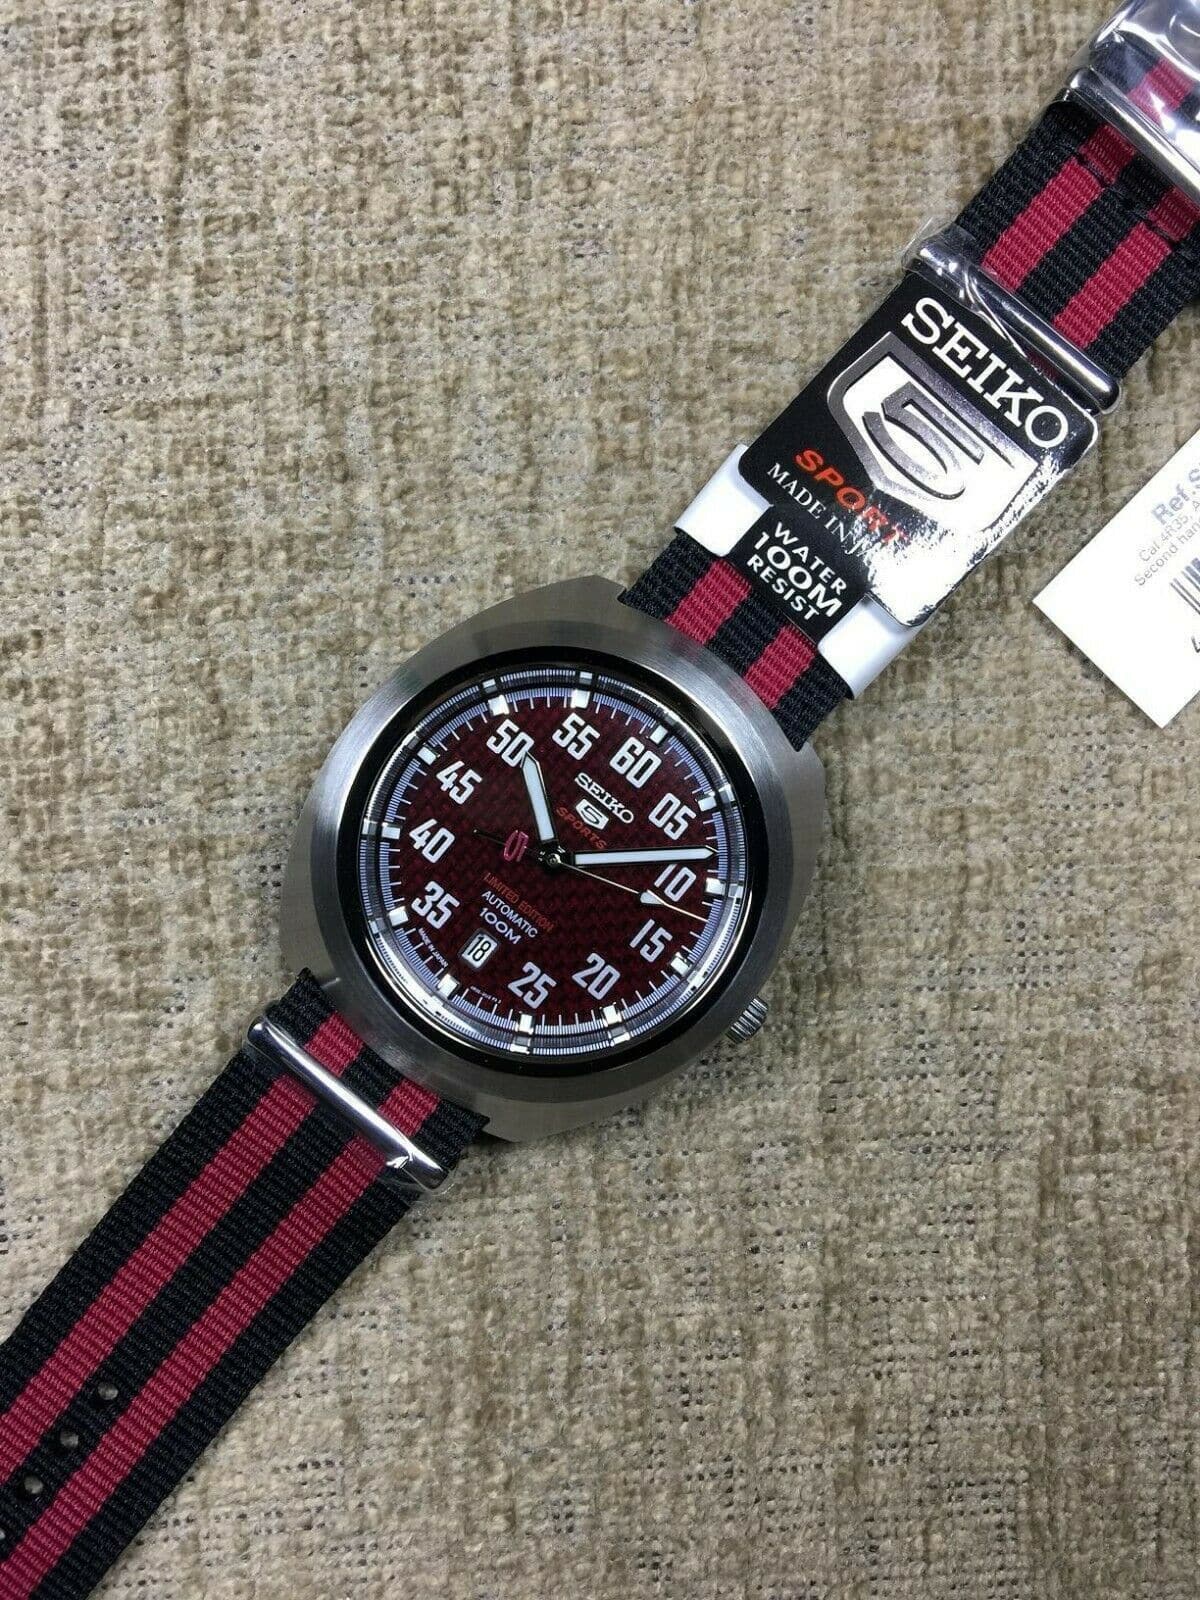 Seiko 5 Sports Japan Made Limited Edition Red Carbon Fiber Dial Helmet Turtle Watch SRPA87J1